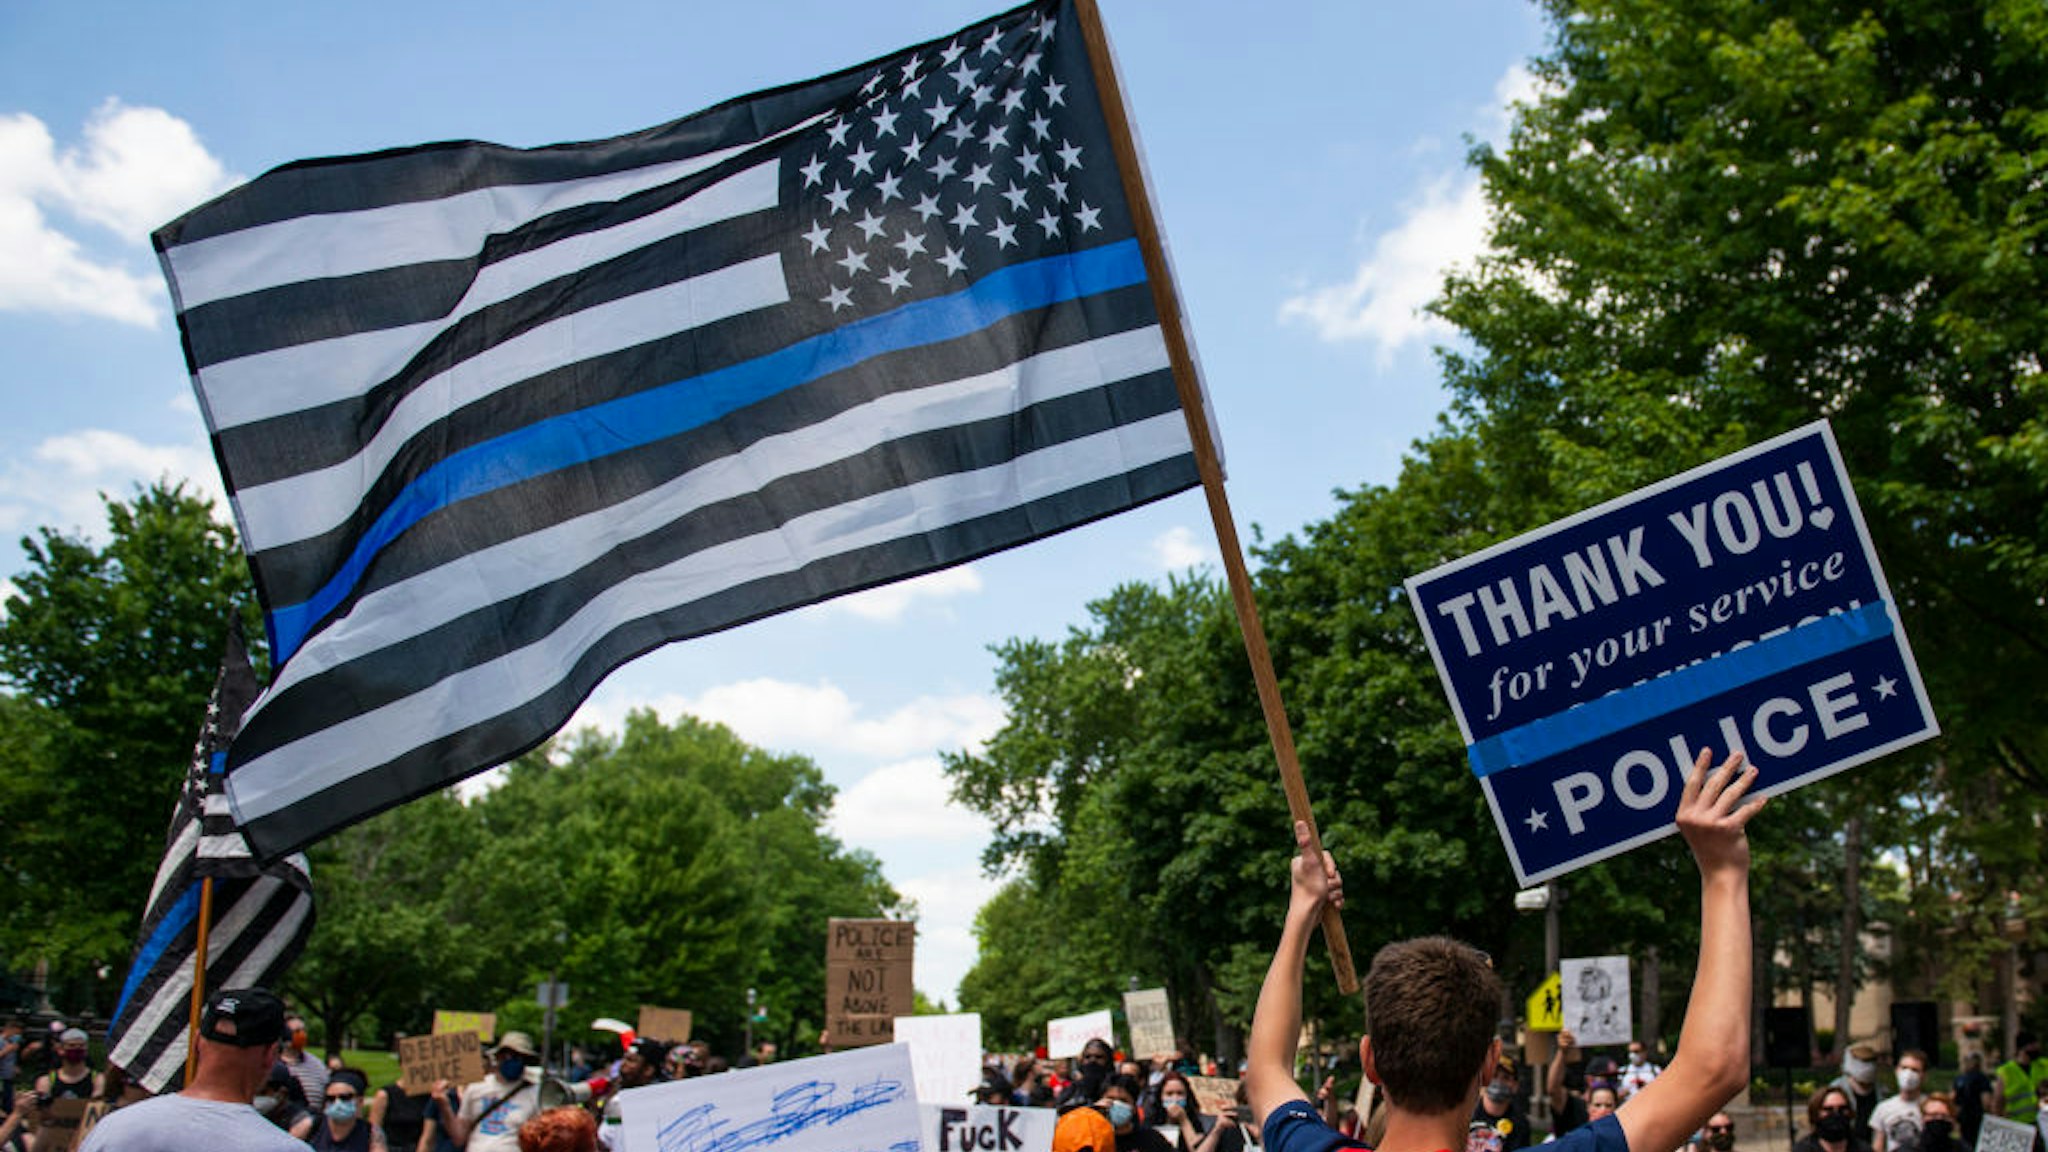 A demonstrator holds a "Thin Blue Line" flag and a sign in support of police during a protest outside the Governors Mansion on June 27, 2020 in St Paul, Minnesota.